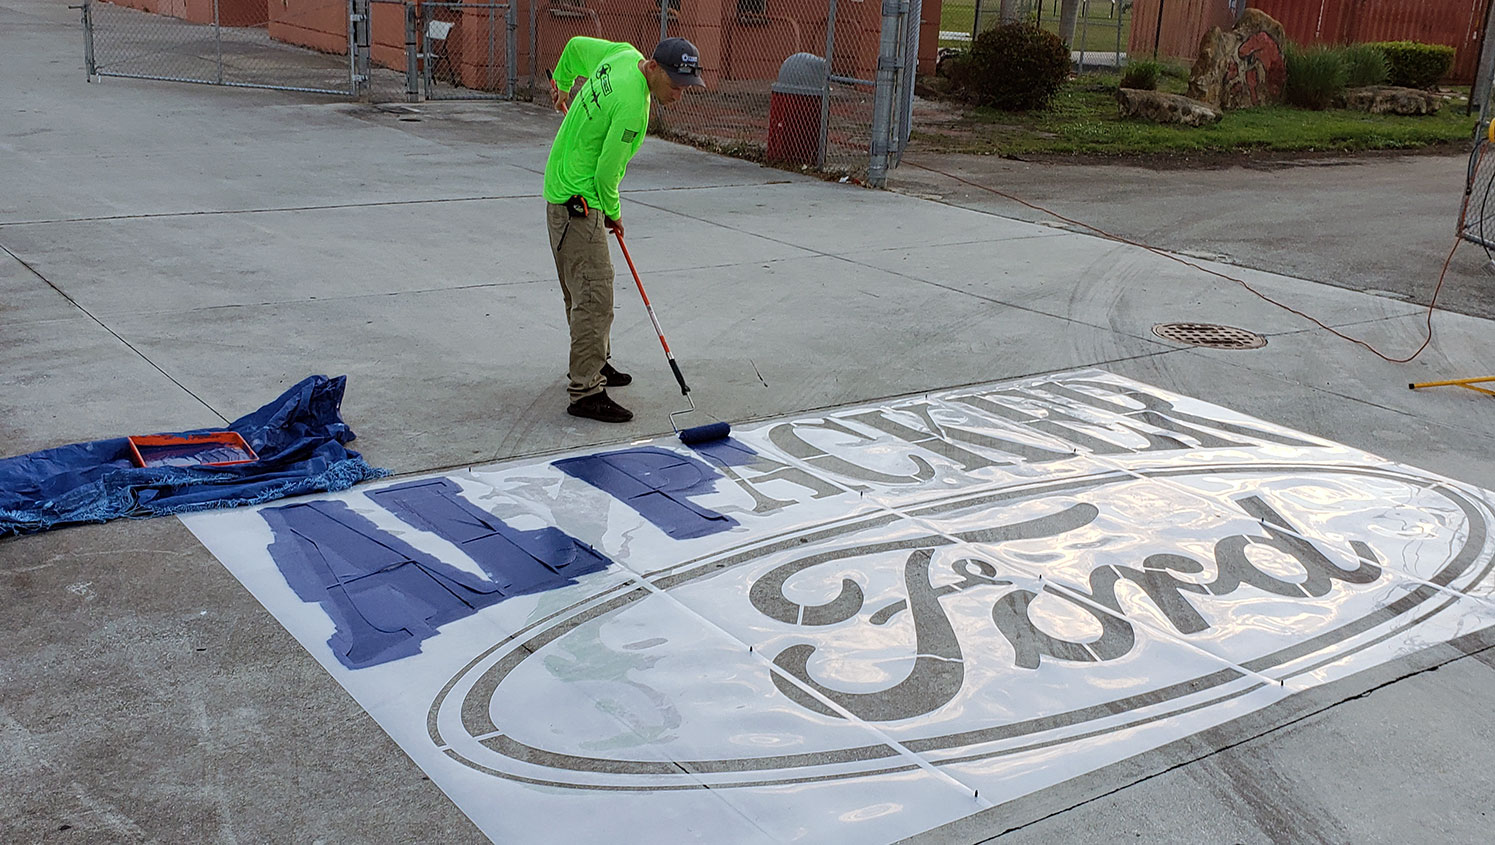 g-force worker applying paint to logo stencil